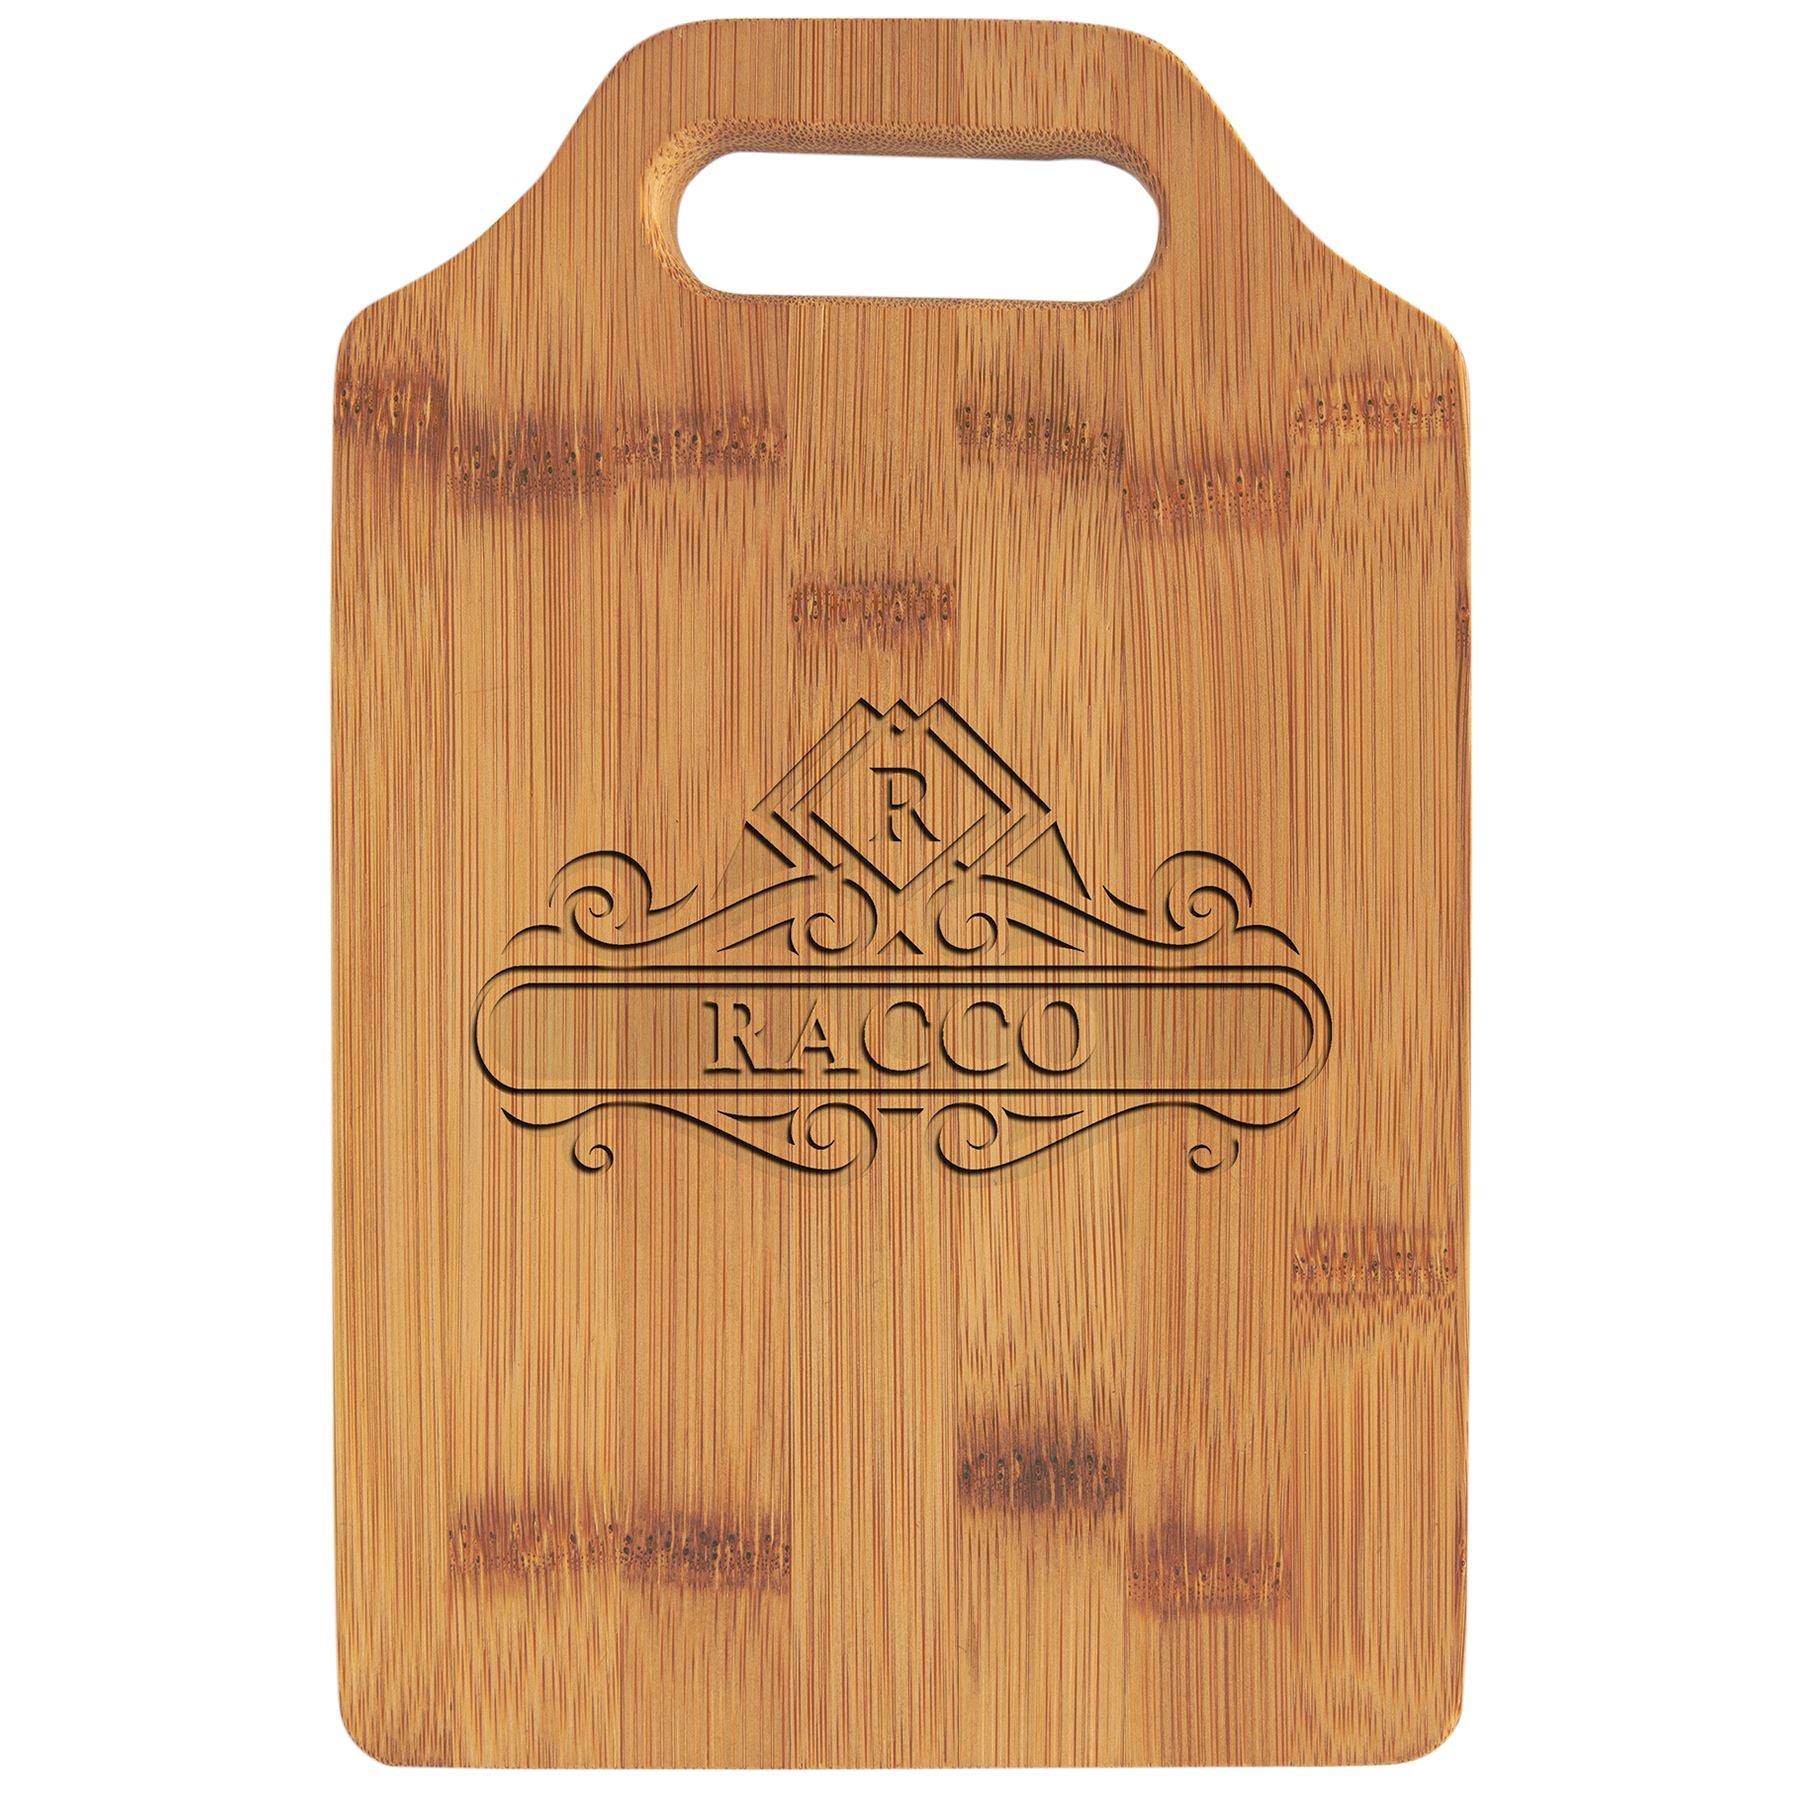 Cutting Board with Handle, Bamboo, 9" x 6", Laser Engraved Cutting Board Craftworks NW 